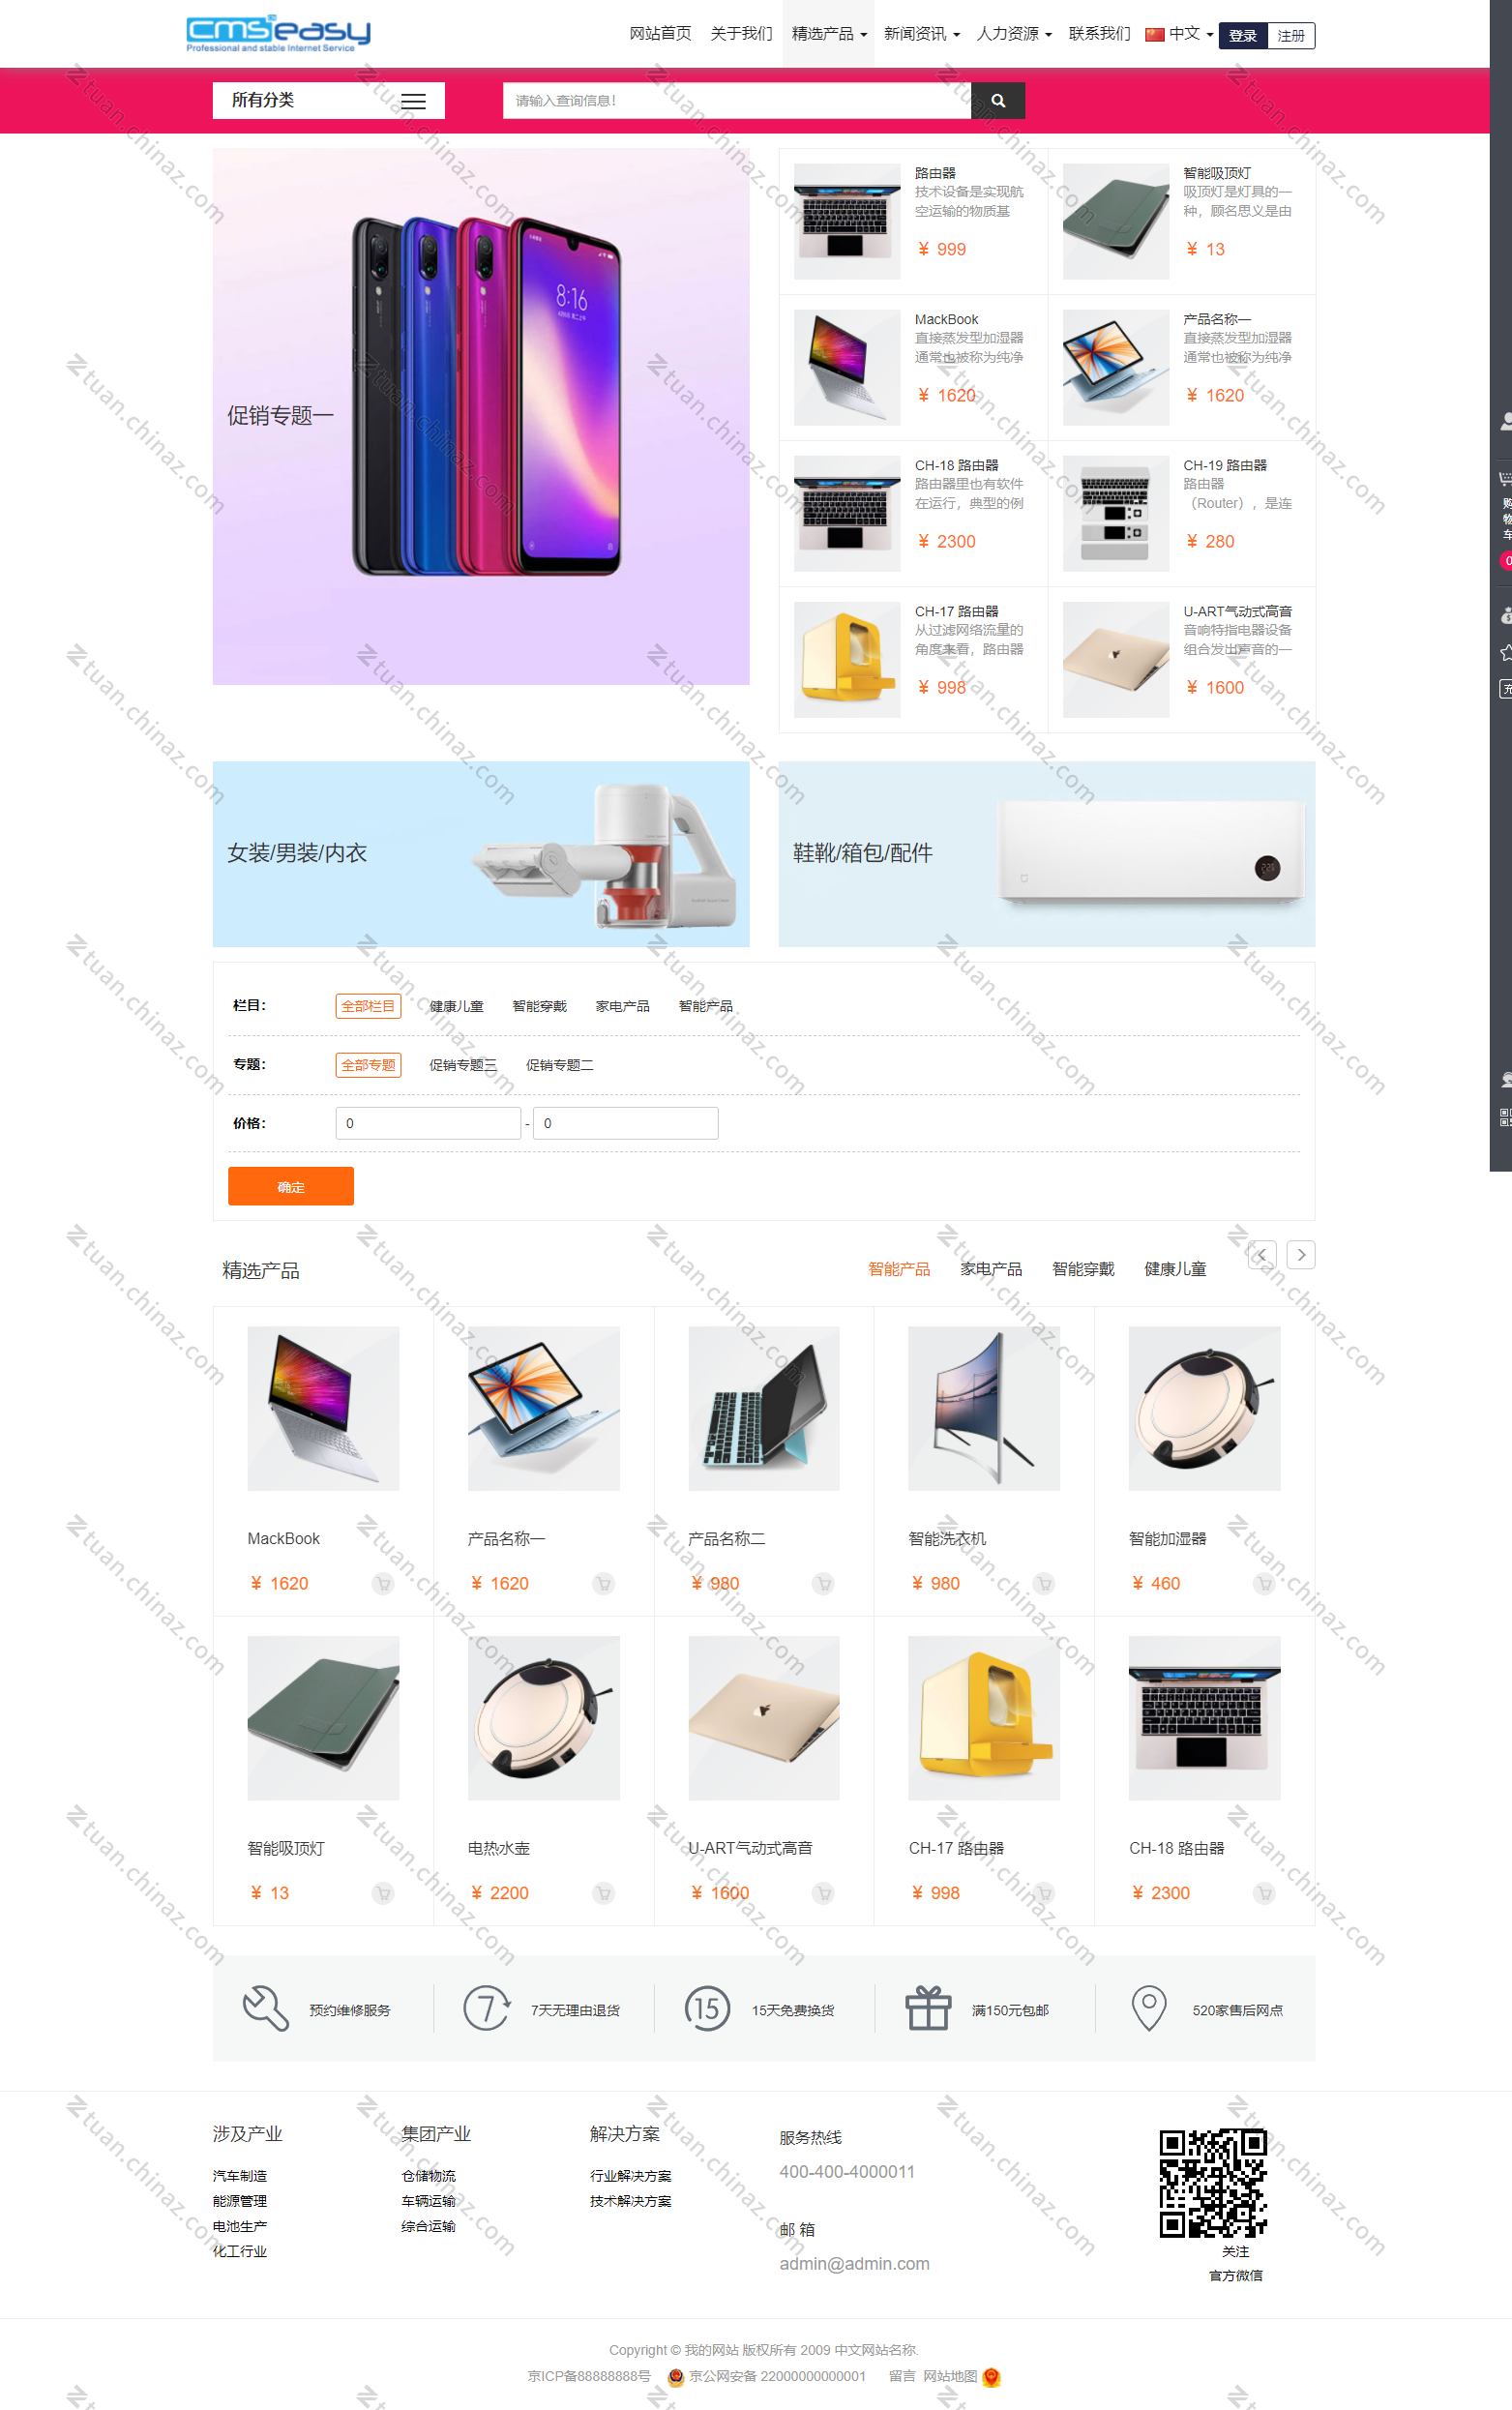 demo.cmseasy.cn_cn_Products_.png